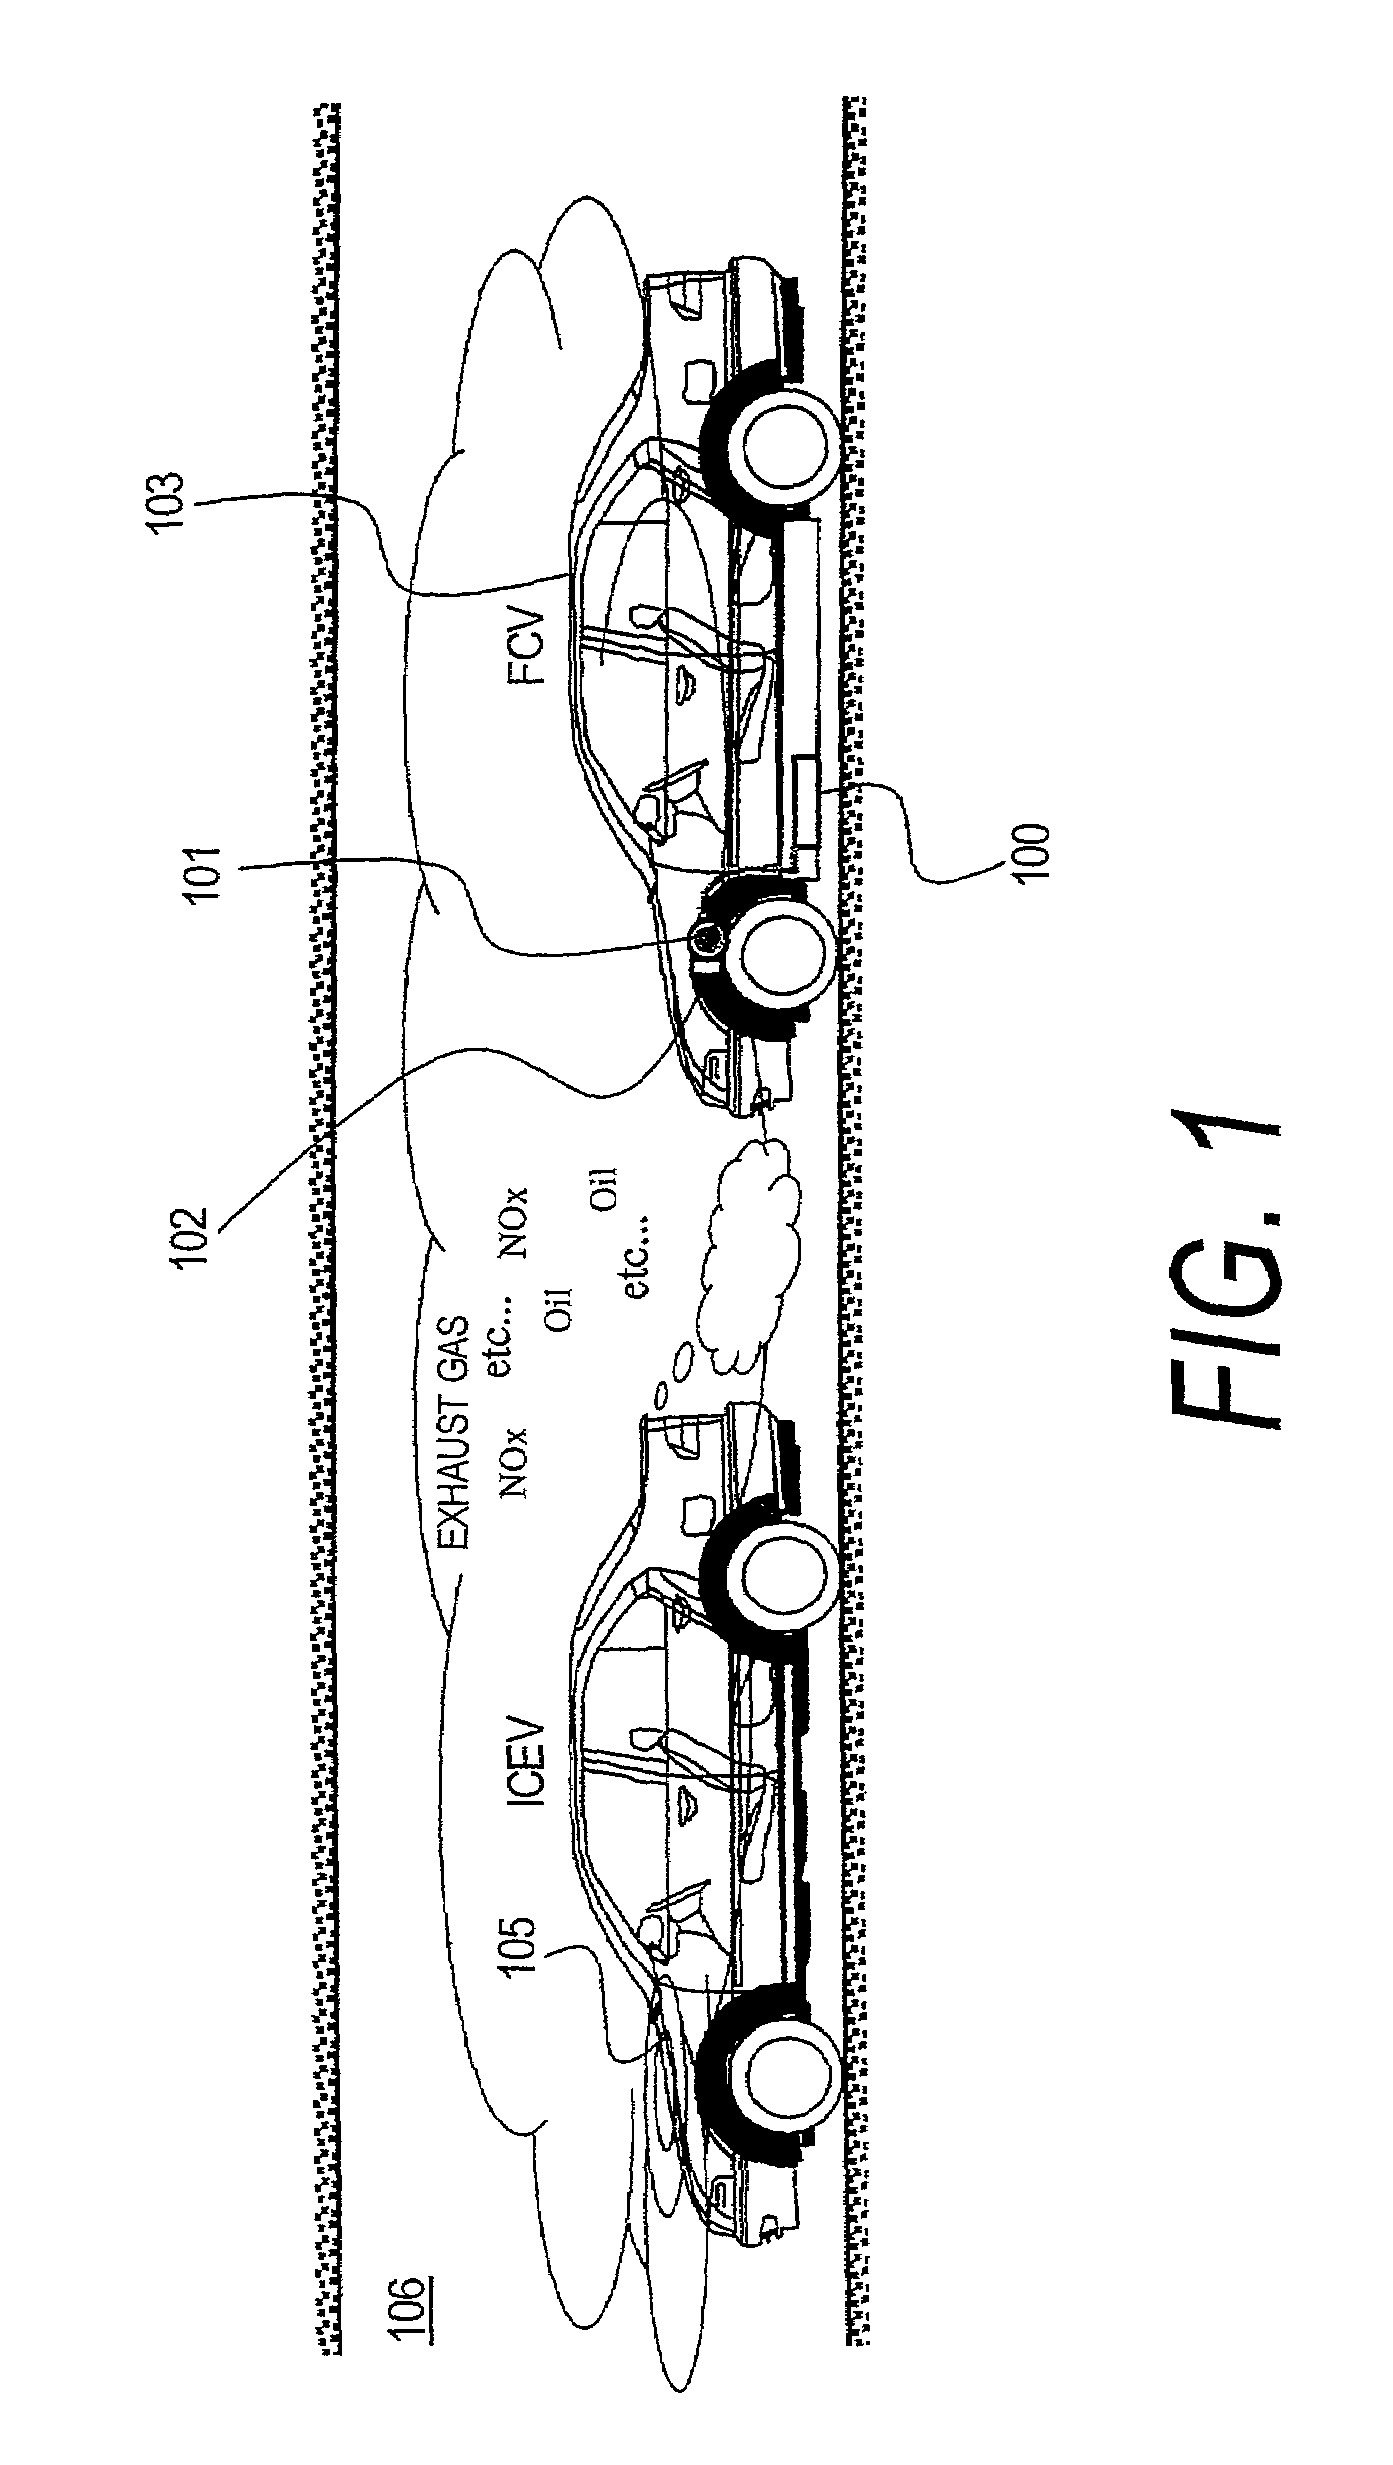 Fuel cell vehicle